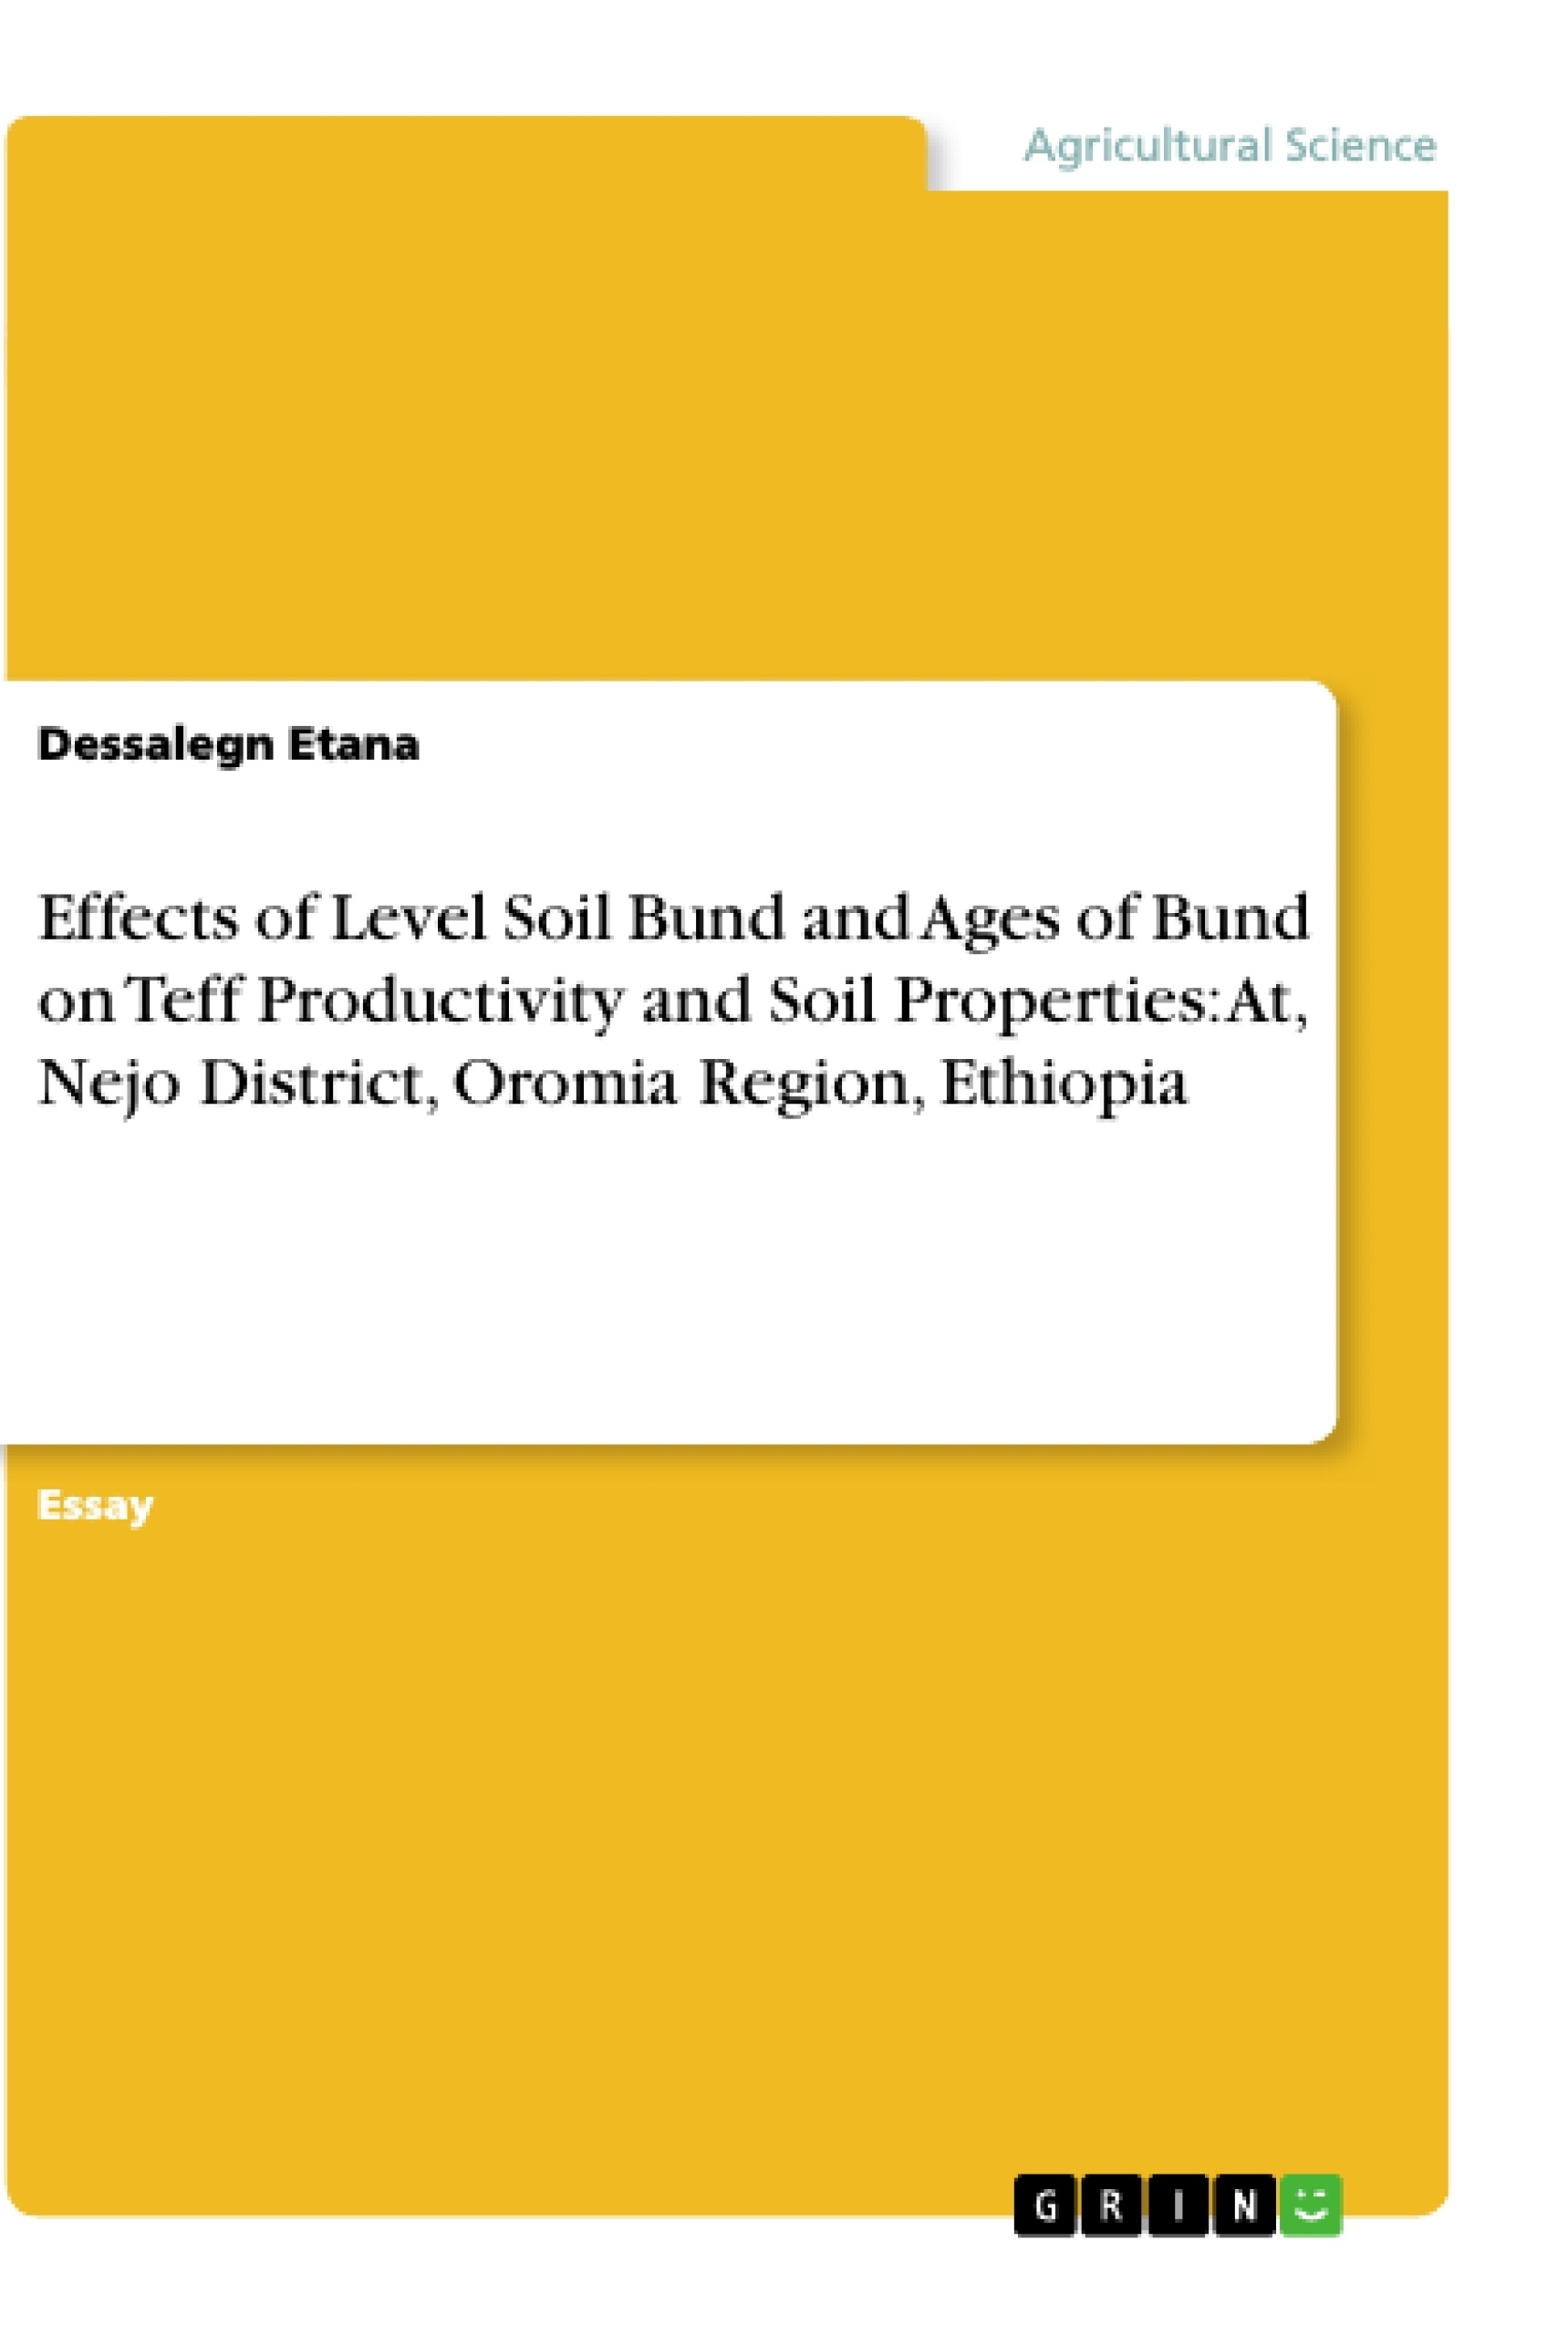 Title: Effects of Level Soil Bund and Ages of Bund on Teff Productivity and Soil Properties: At, Nejo District, Oromia Region, Ethiopia